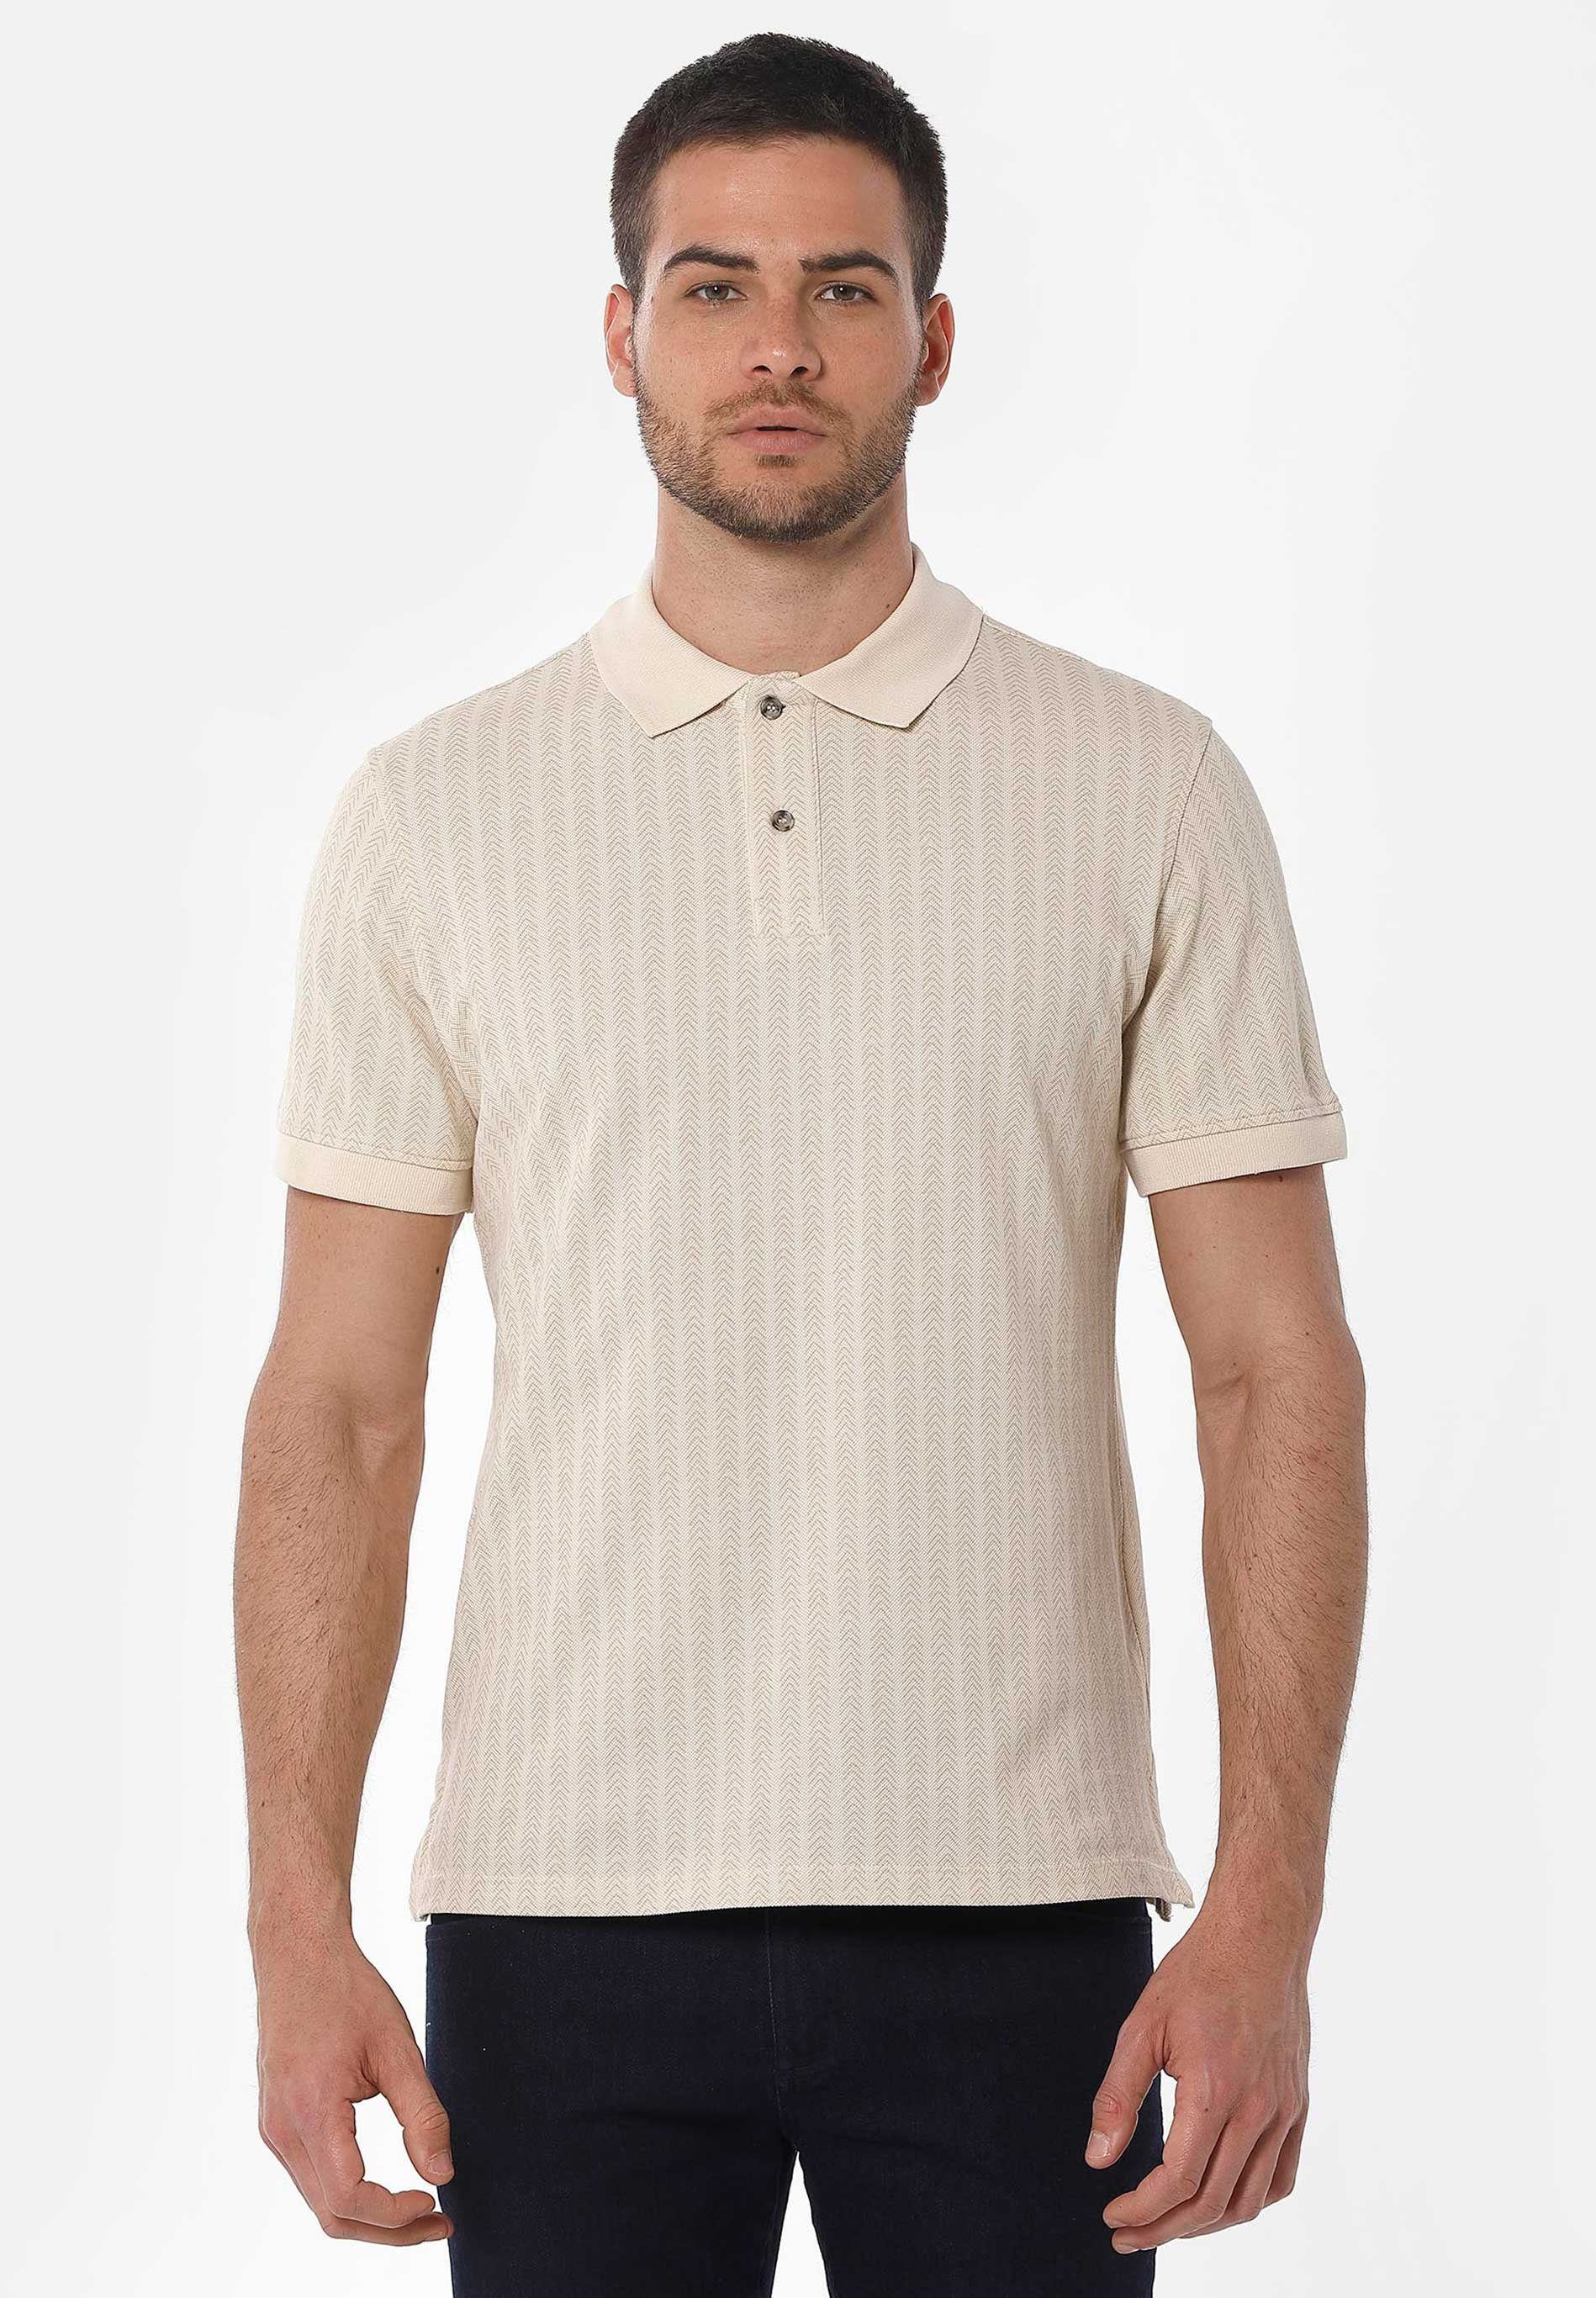 ORGANICATION Poloshirt Men's All-Over Printed Polo Shirt in Beige